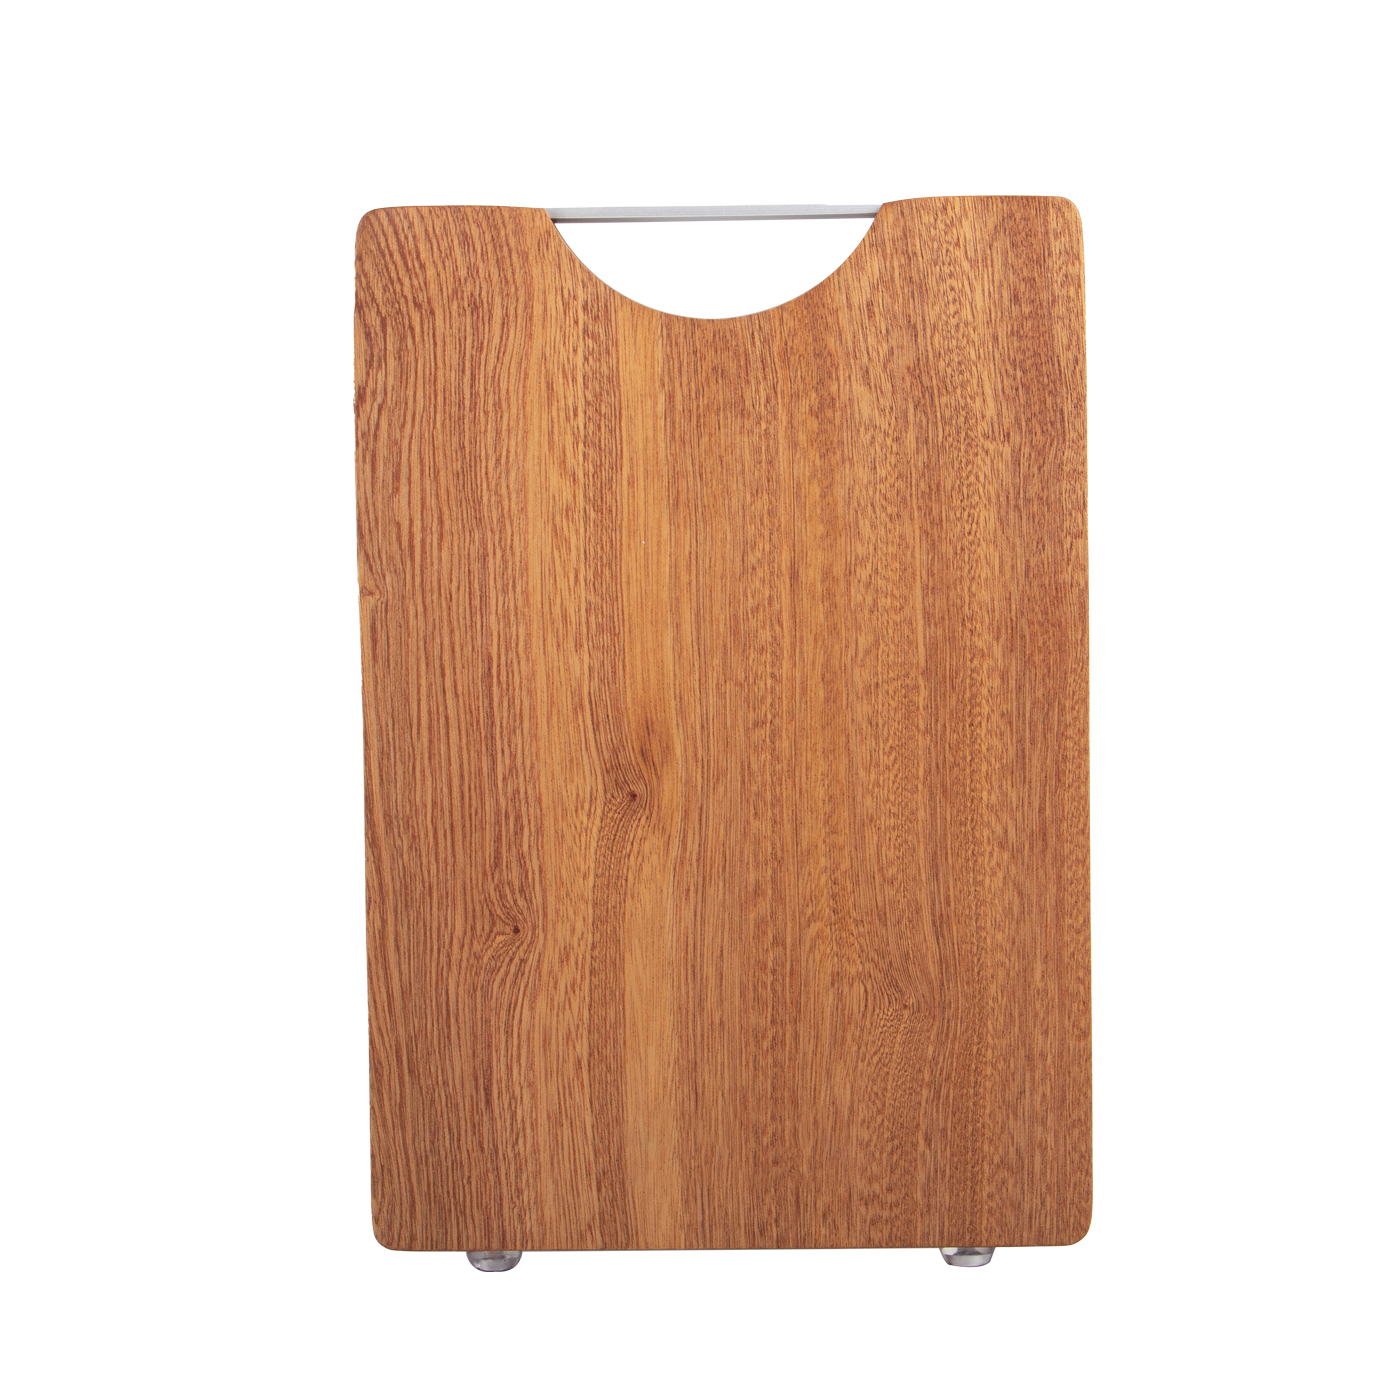 Wooden Cutting Board With Stainless Steel Handle